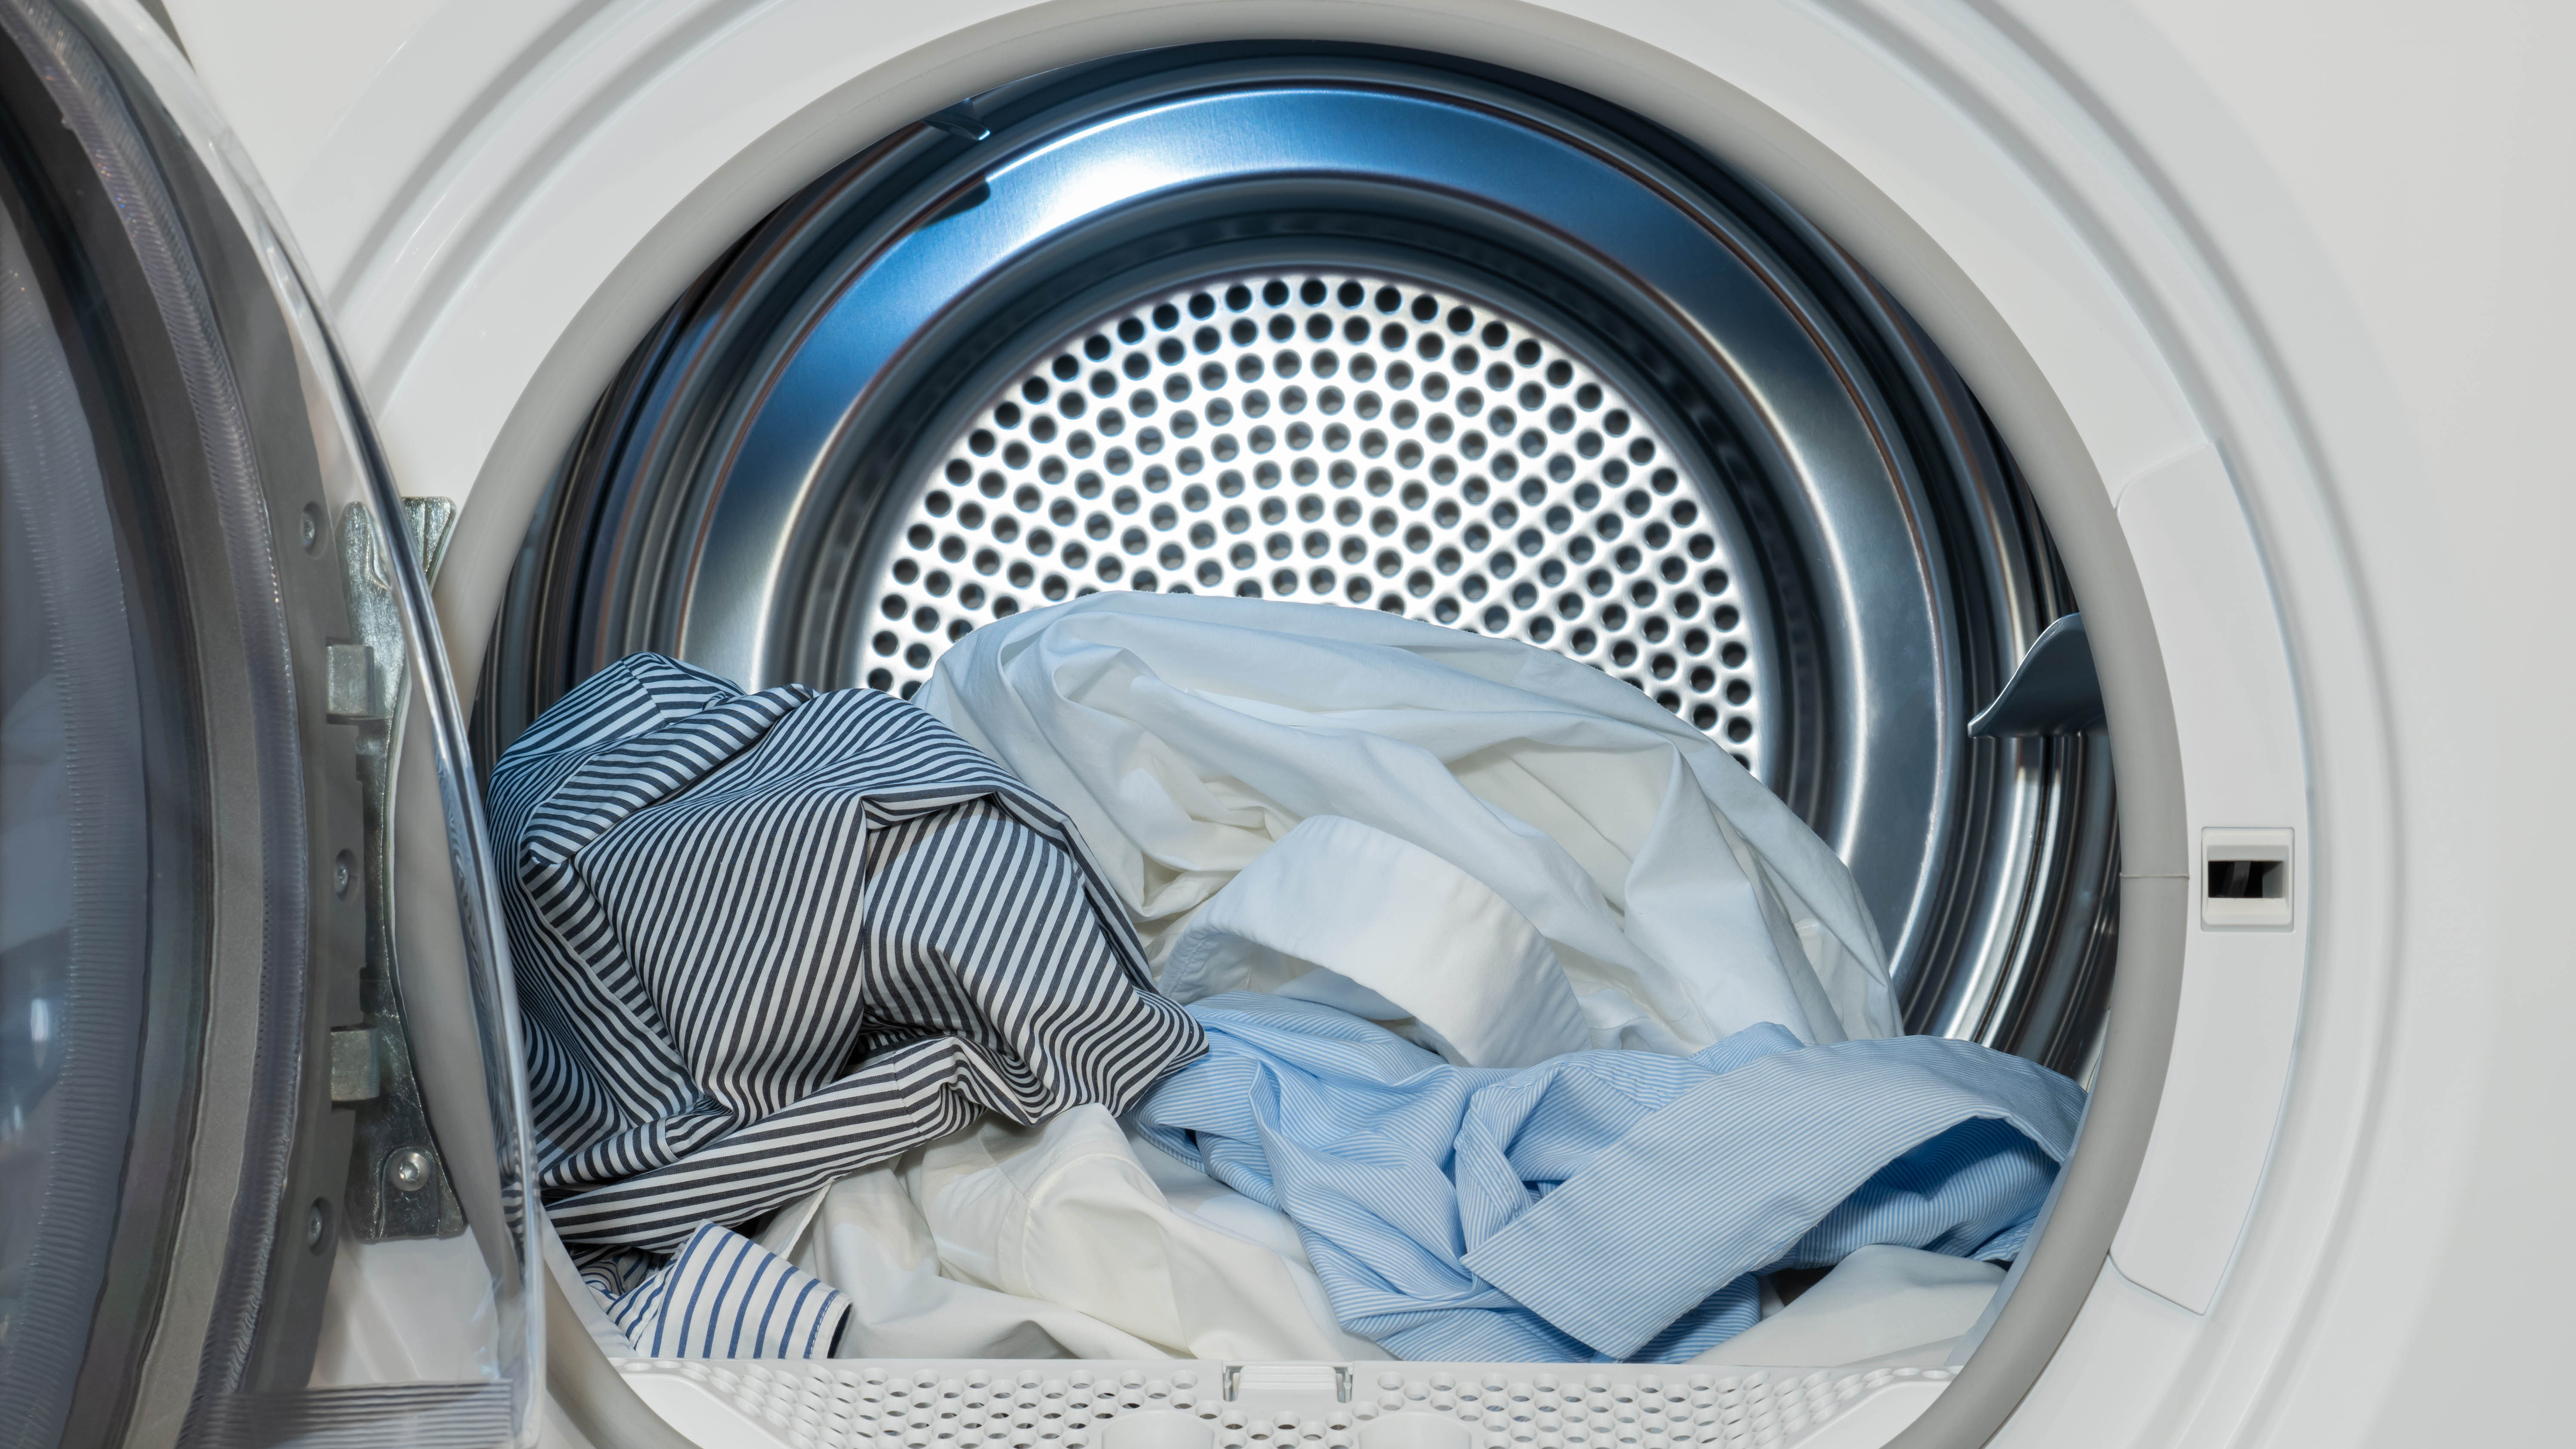 væske Marvel lindring 10 Things you should never put in the dryer | Tom's Guide